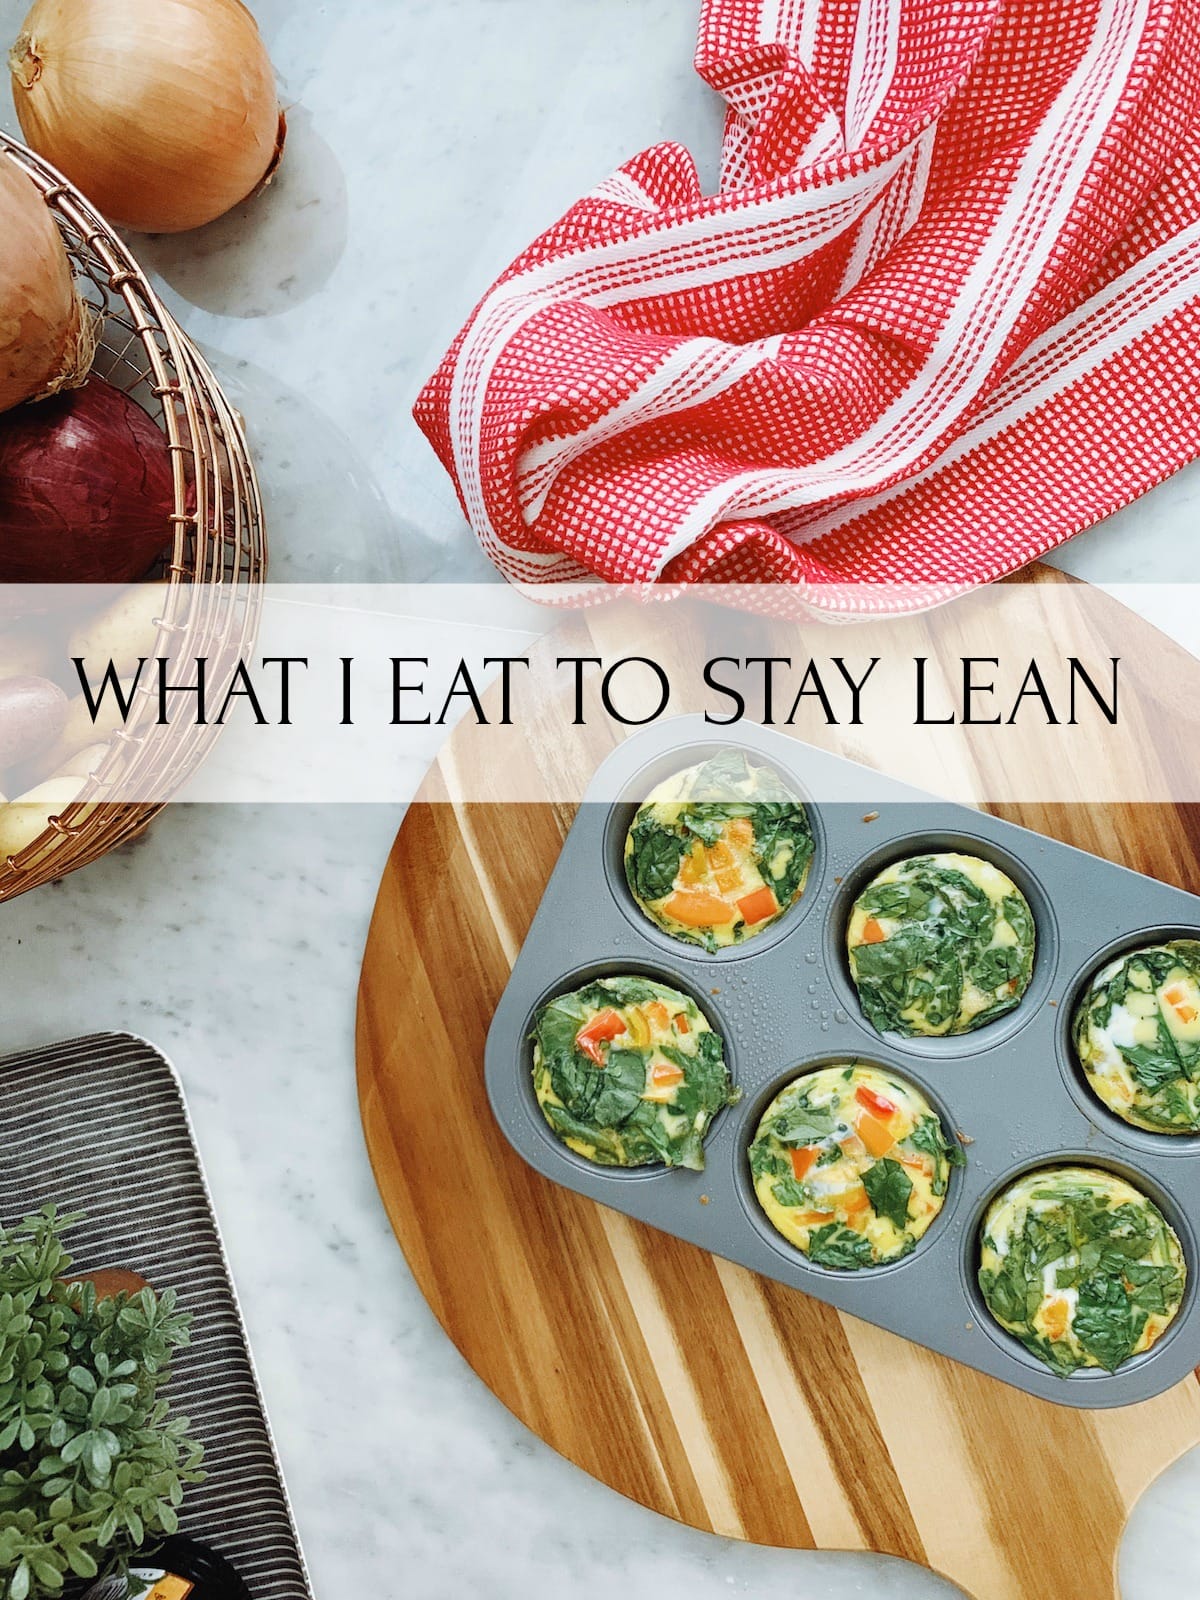 WHAT I EAT TO STAY LEAN